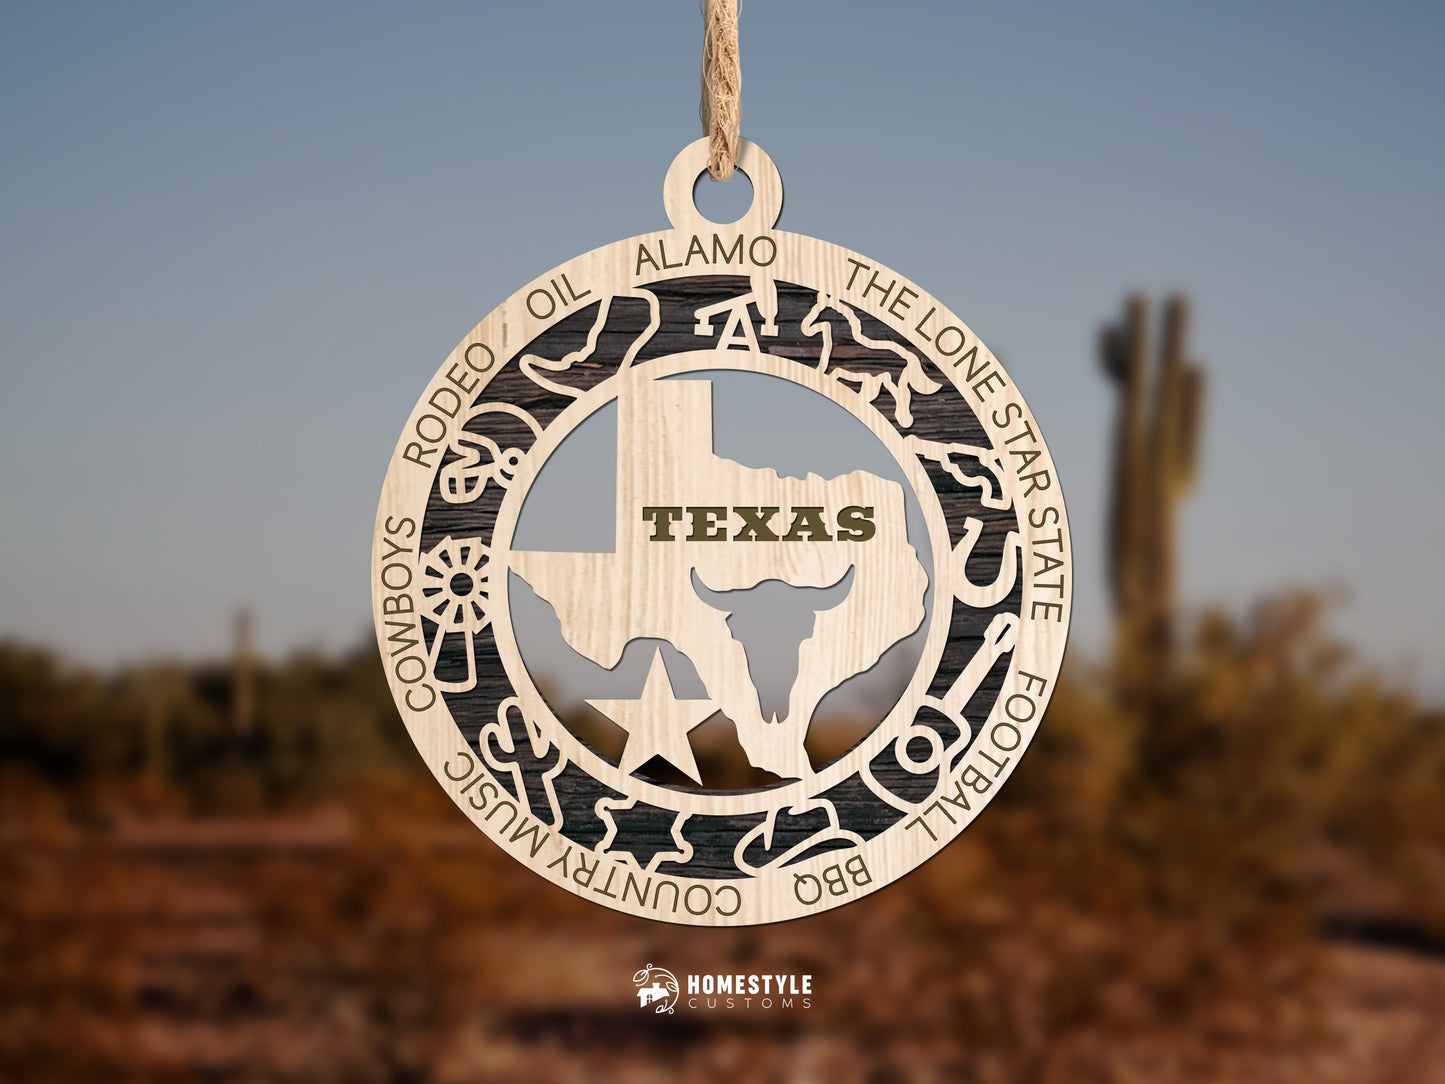 Texas State Ornament - SVG File Download - Sized for Glowforge - Laser Ready Digital Files